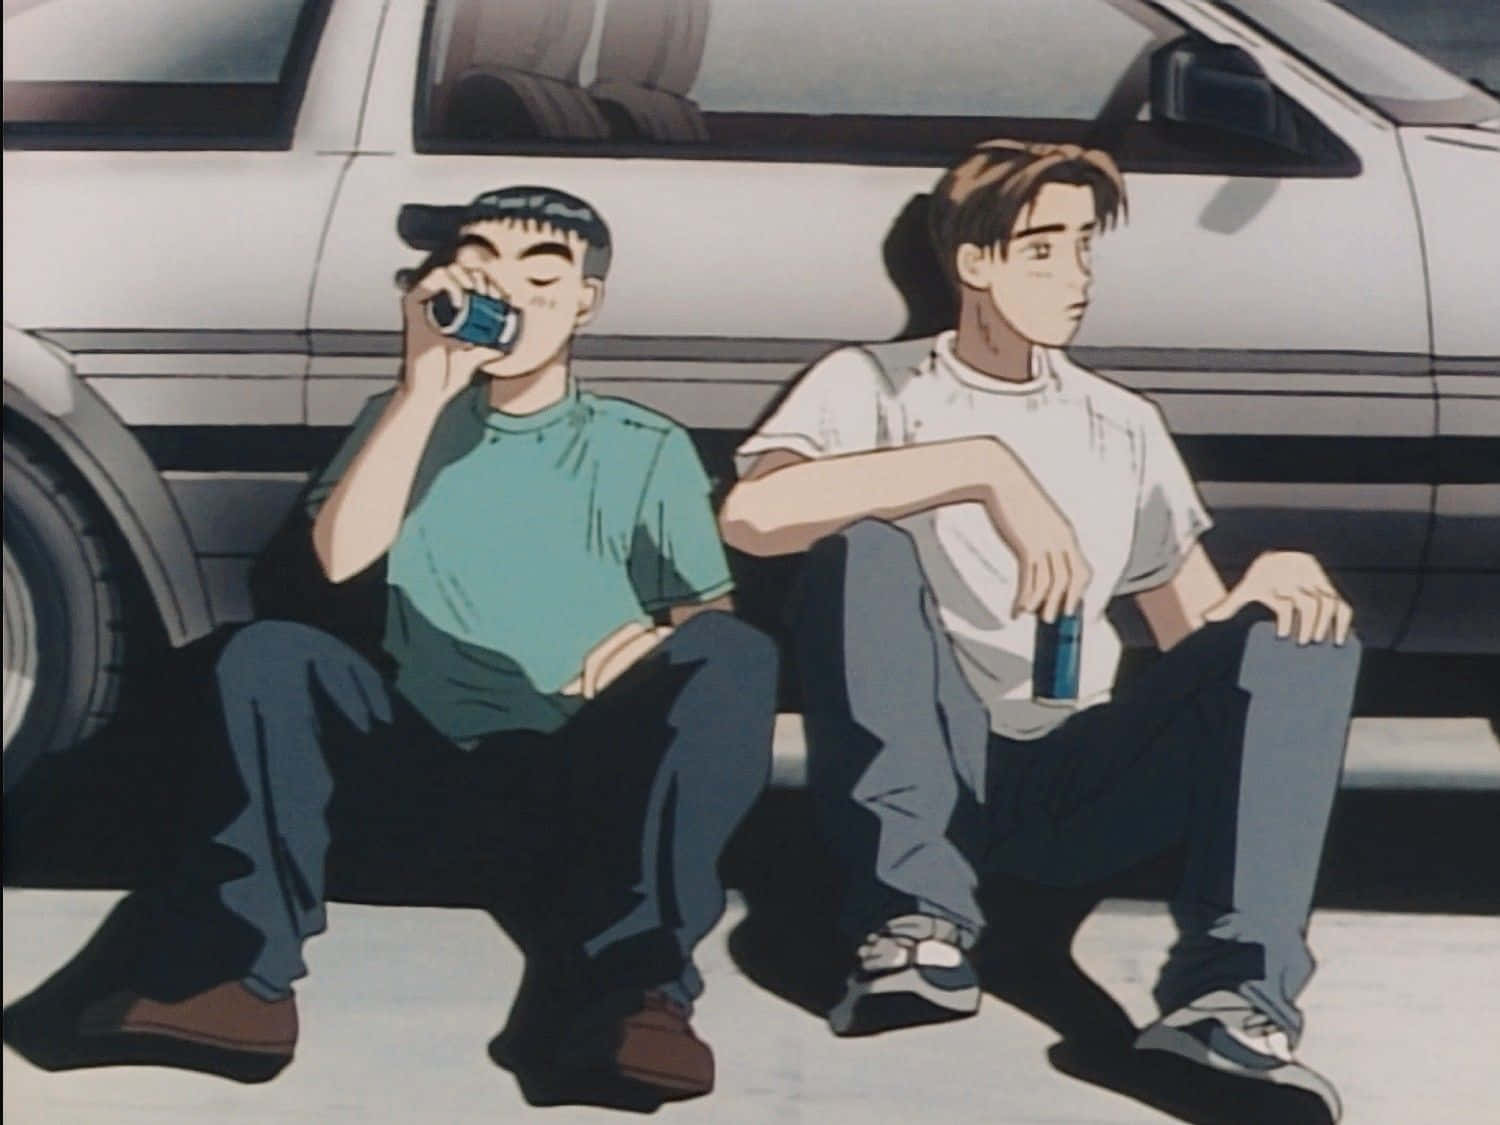 The Fast and the Furious in Japan - Meet the racers of the Initial D street racing universe.